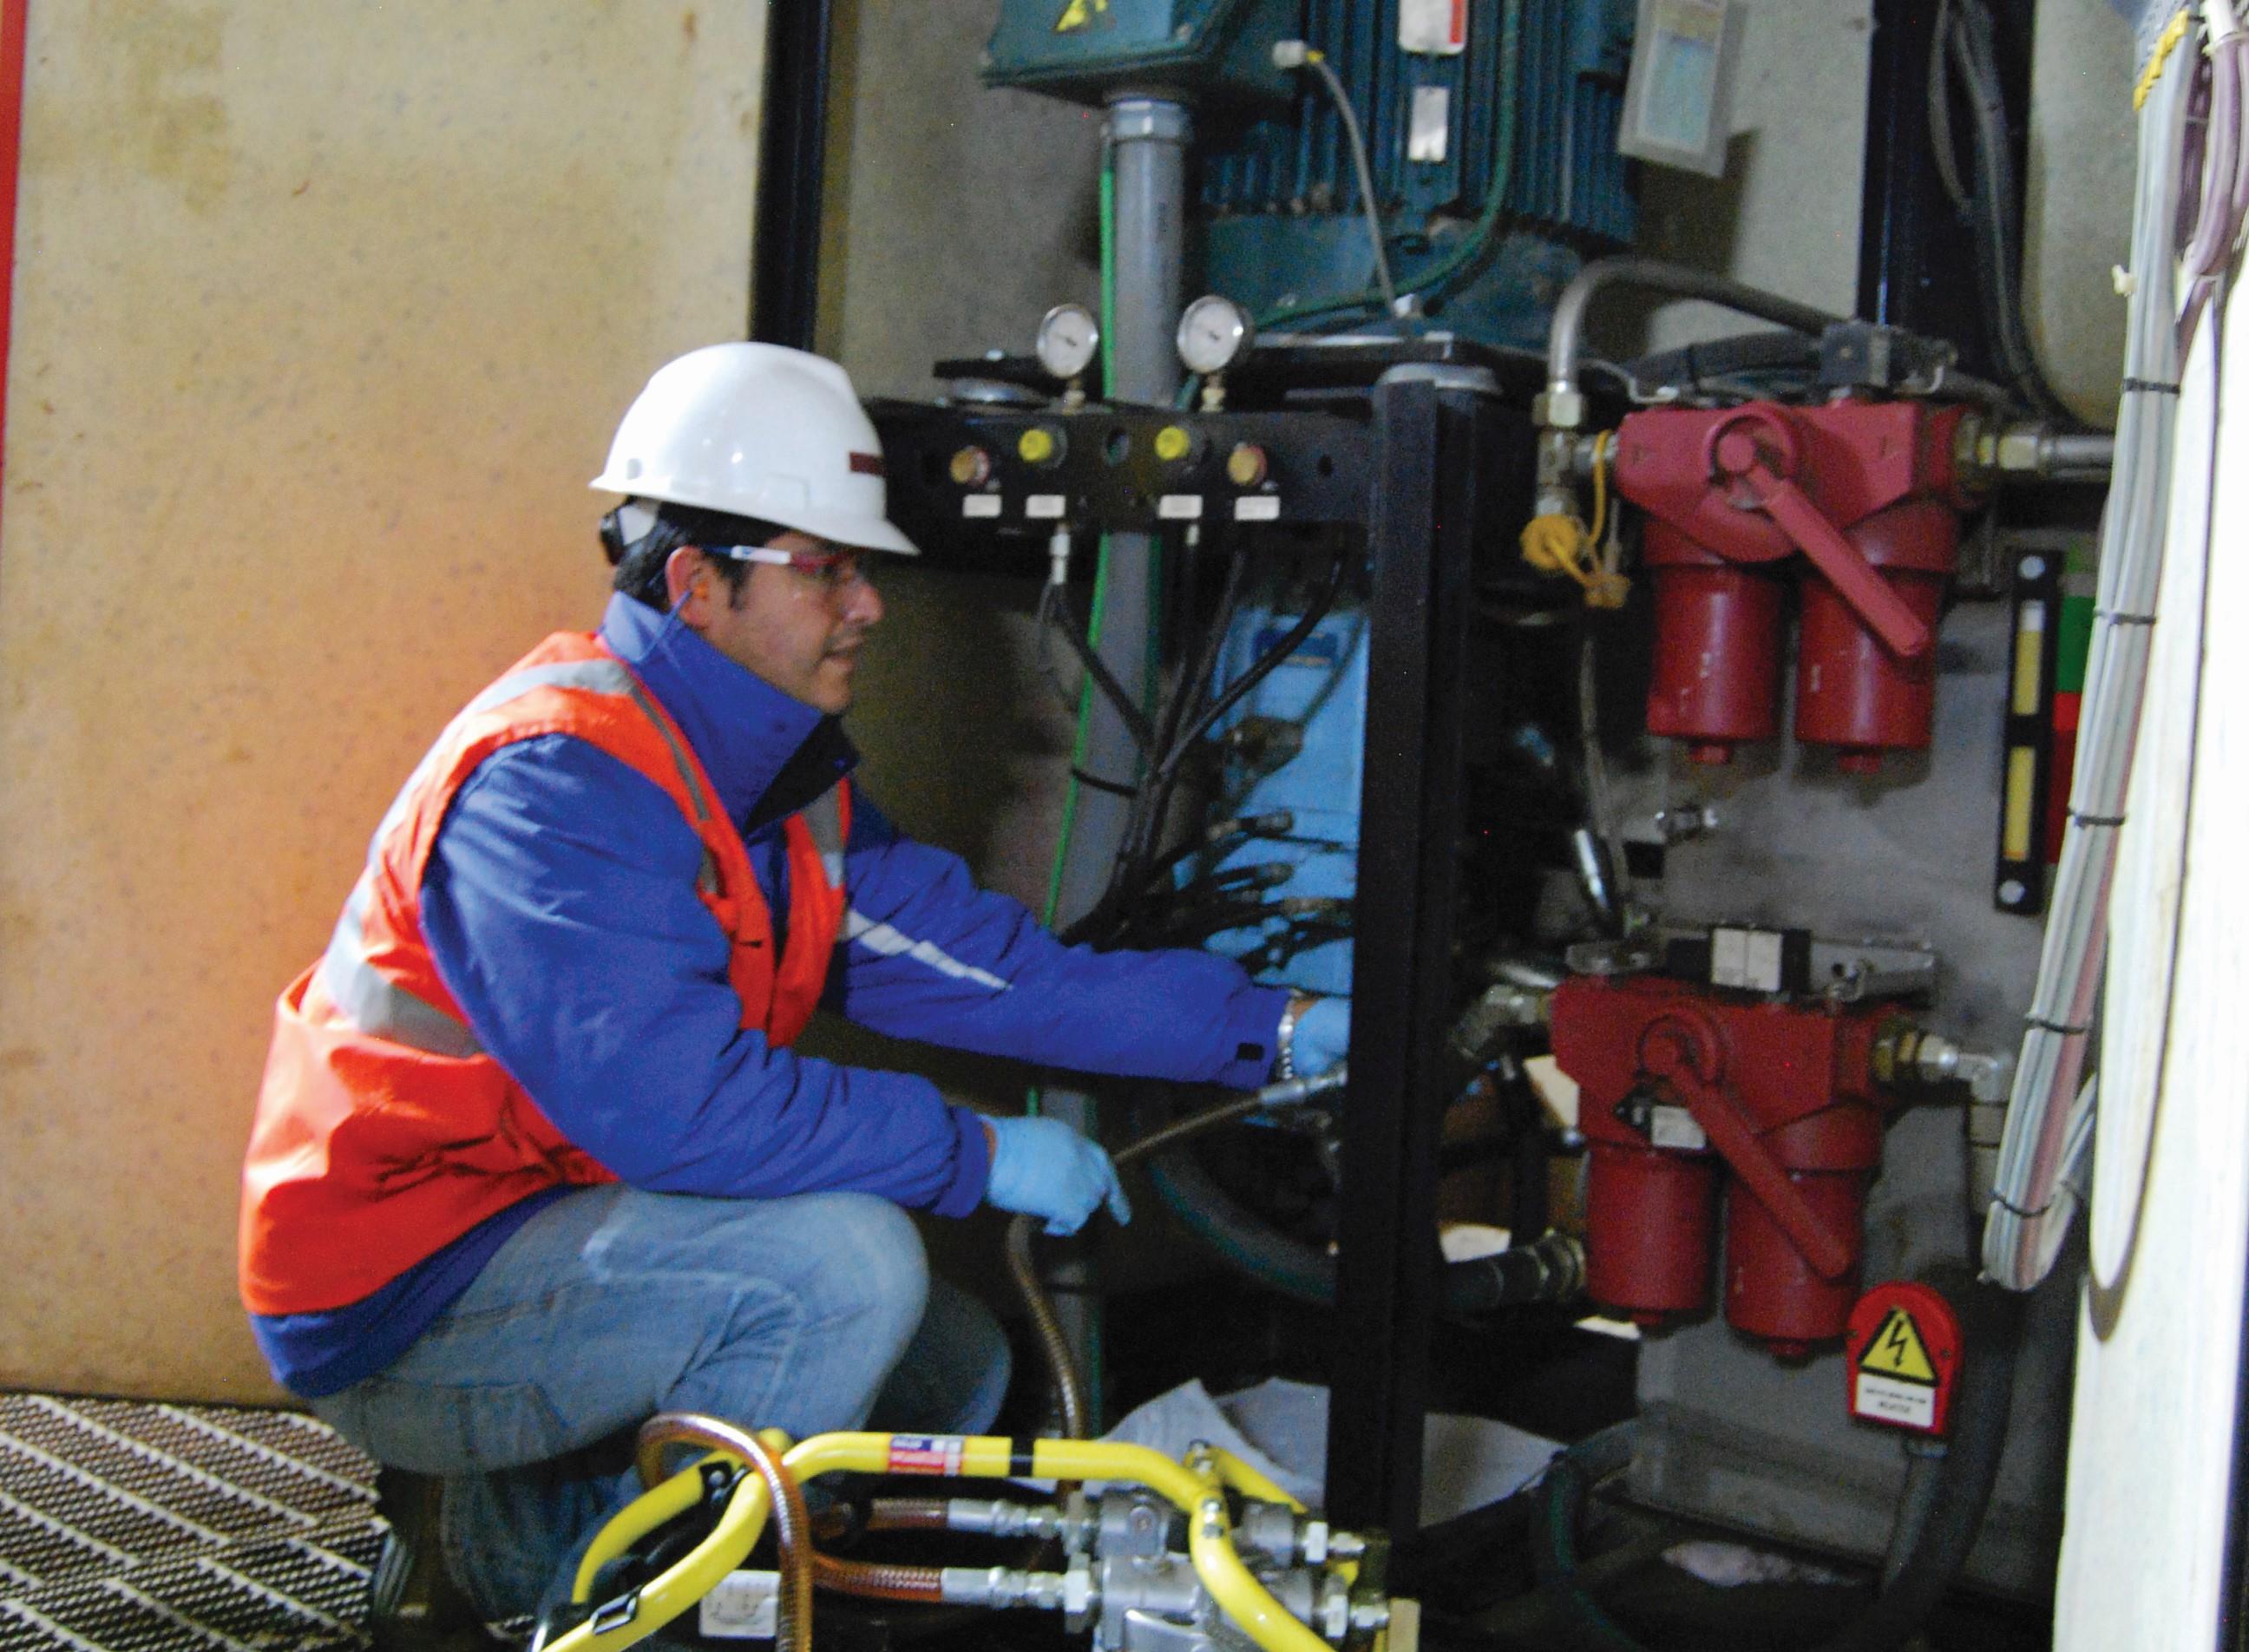 Benchmarking your lubrication performance for improved reliability